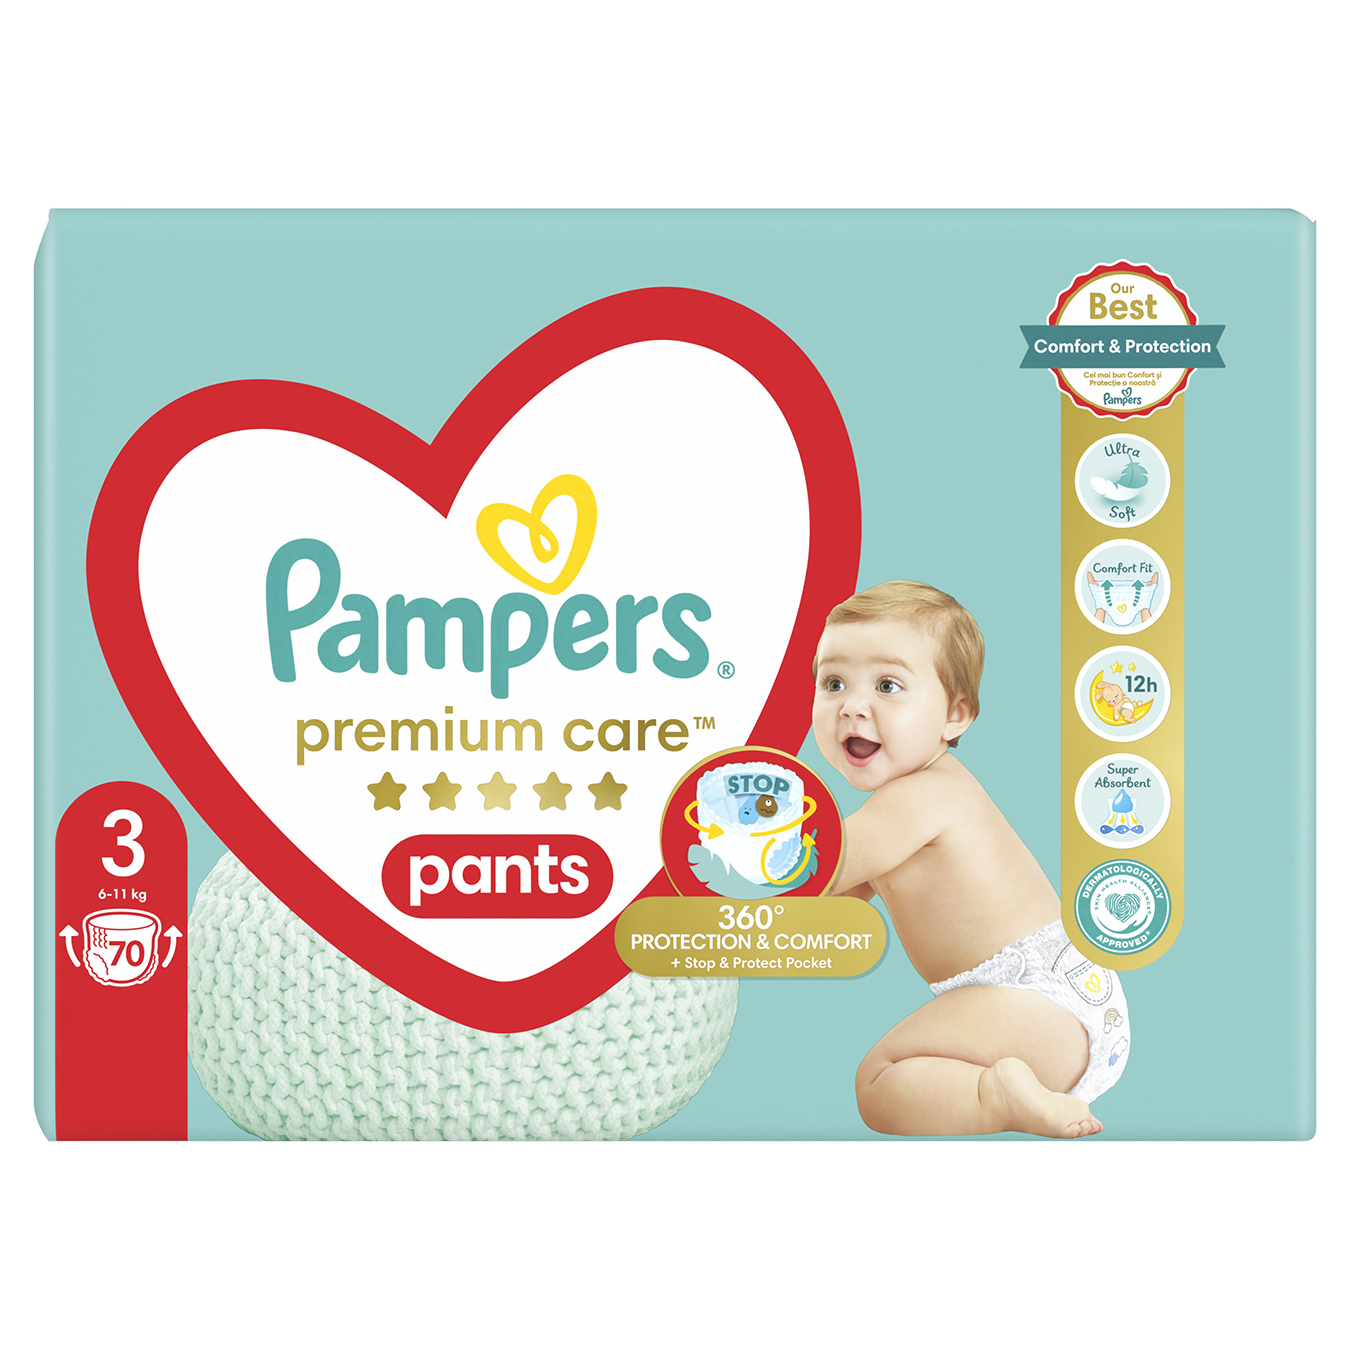 Midi a ᐈ Buy diapers-panties 70 price Novus for good Pants Care pcs kg 6-11 Premium Pampers at children from